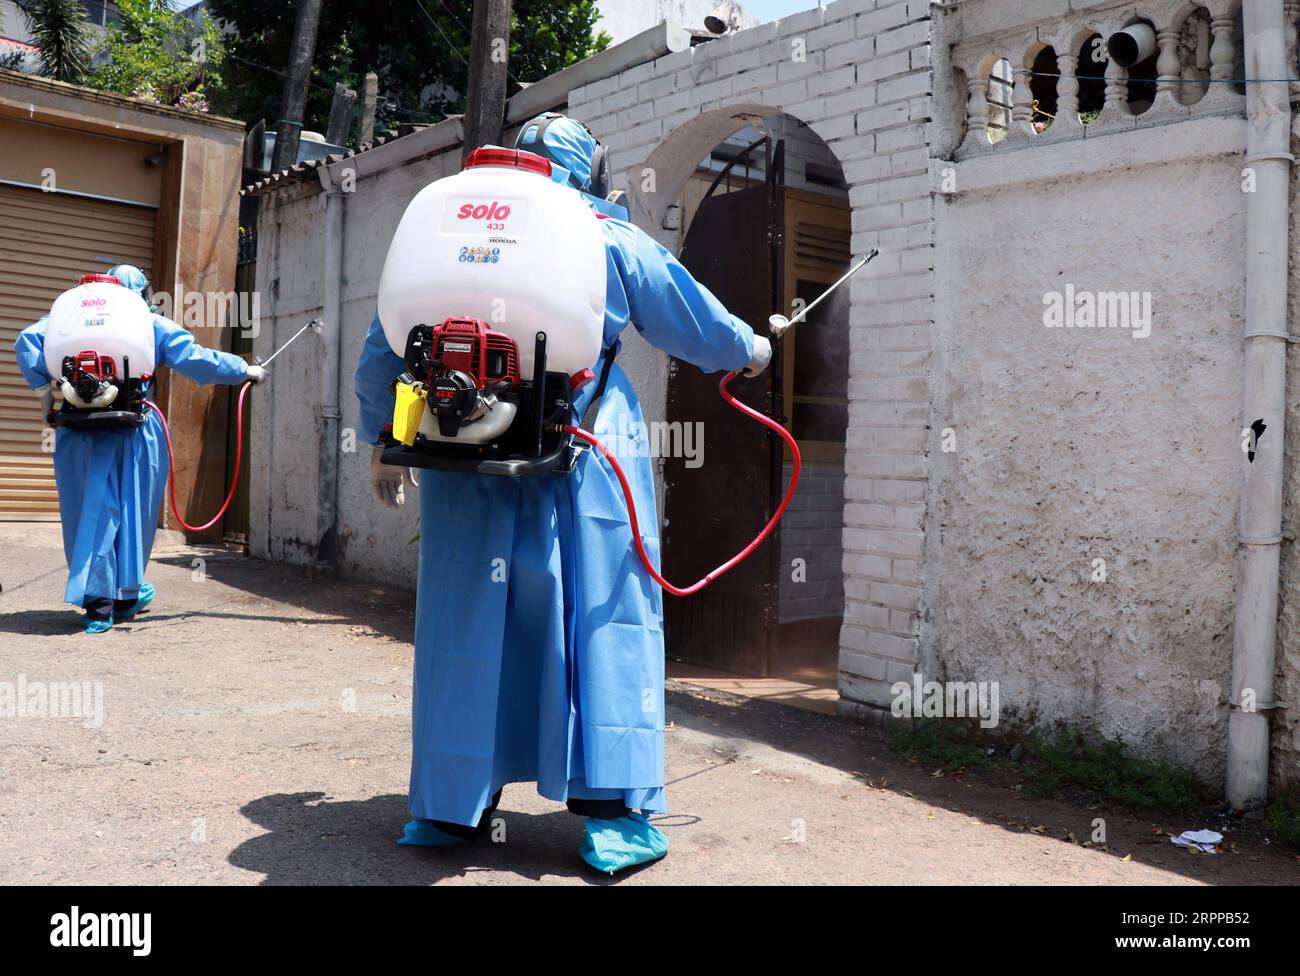 200314 -- COLOMBO, March 14, 2020 -- Health workers wearing protective suits spray disinfectant on a housing complex in Colombo, Sri Lanka, March 14, 2020. The number of confirmed cases of COVID-19 in Sri Lanka rose to 10 on Saturday evening with the latest being two females aged 56 and 17 years old, the Health Ministry said in a statement here. All the patients are currently receiving treatment at the Infectious Disease Hospital on the outskirts of the capital and the Polonnaruwa Hospital in north central Sri Lanka. Photo by /Xinhua SRI LANKA-COLOMBO-COVID-19 AjithxPerera PUBLICATIONxNOTxINxC Stock Photo